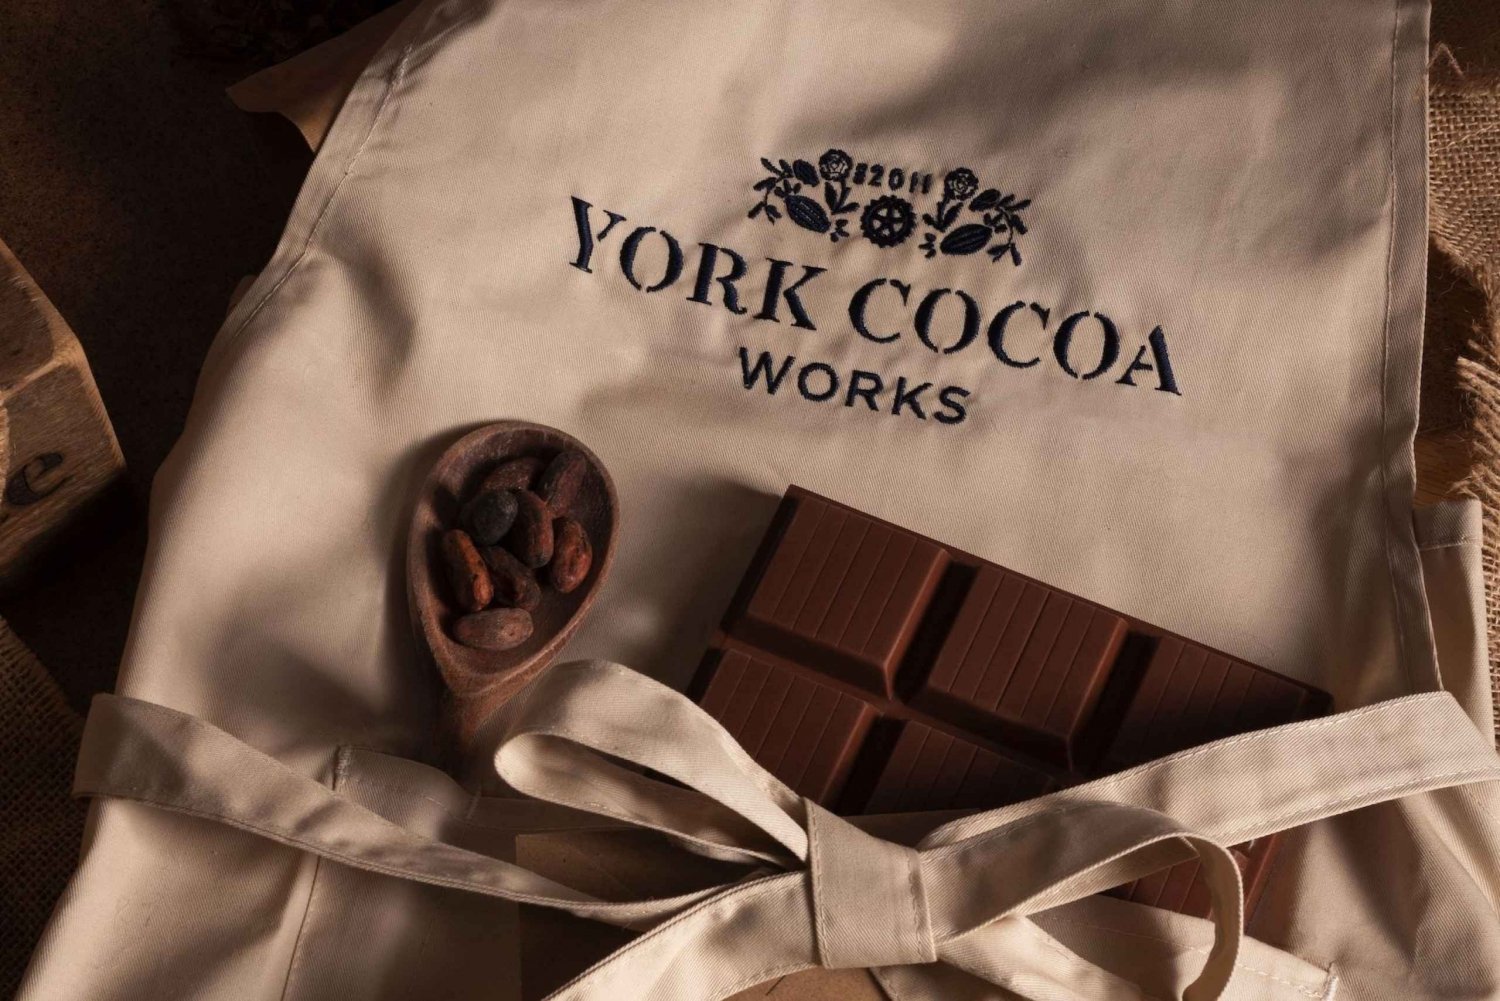 York: Introduction to Chocolate Making Experience